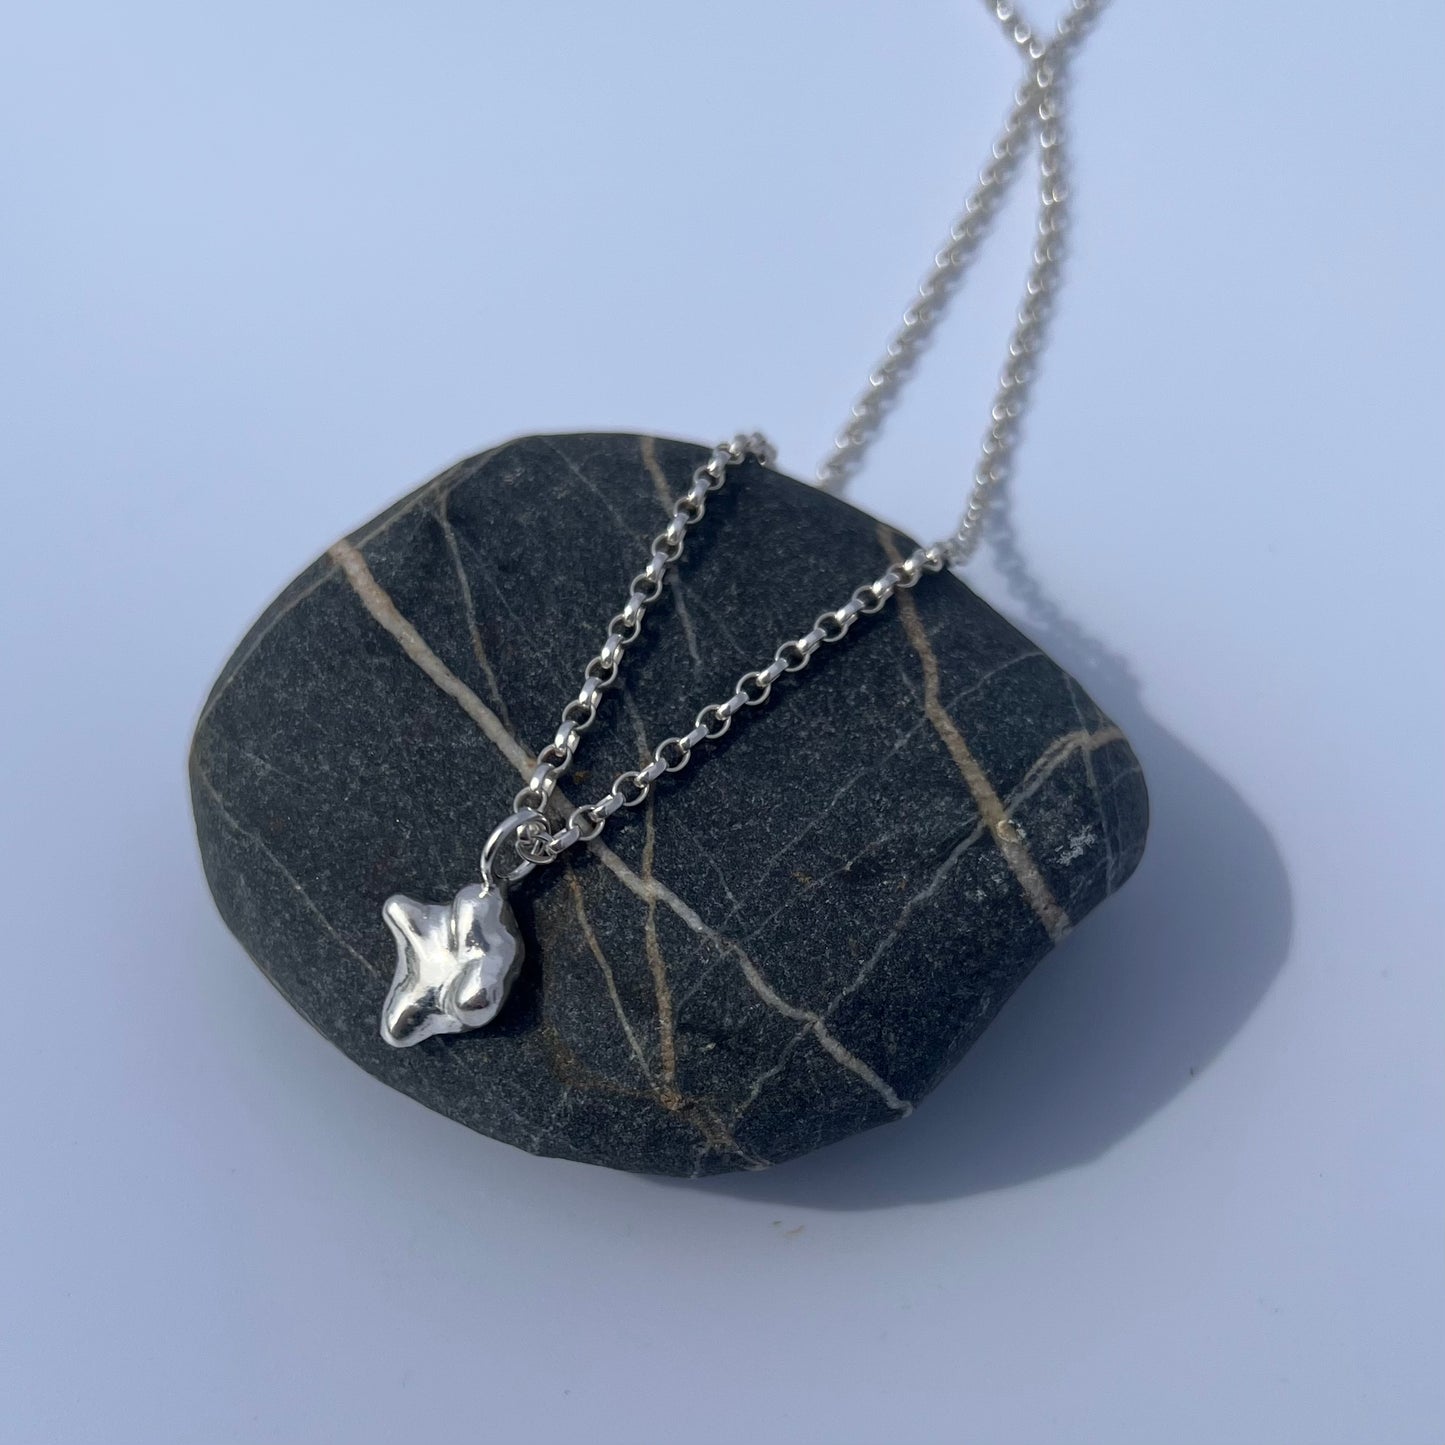 The swell pendant in sterling silver on a chain sitting on a rock with a white background.